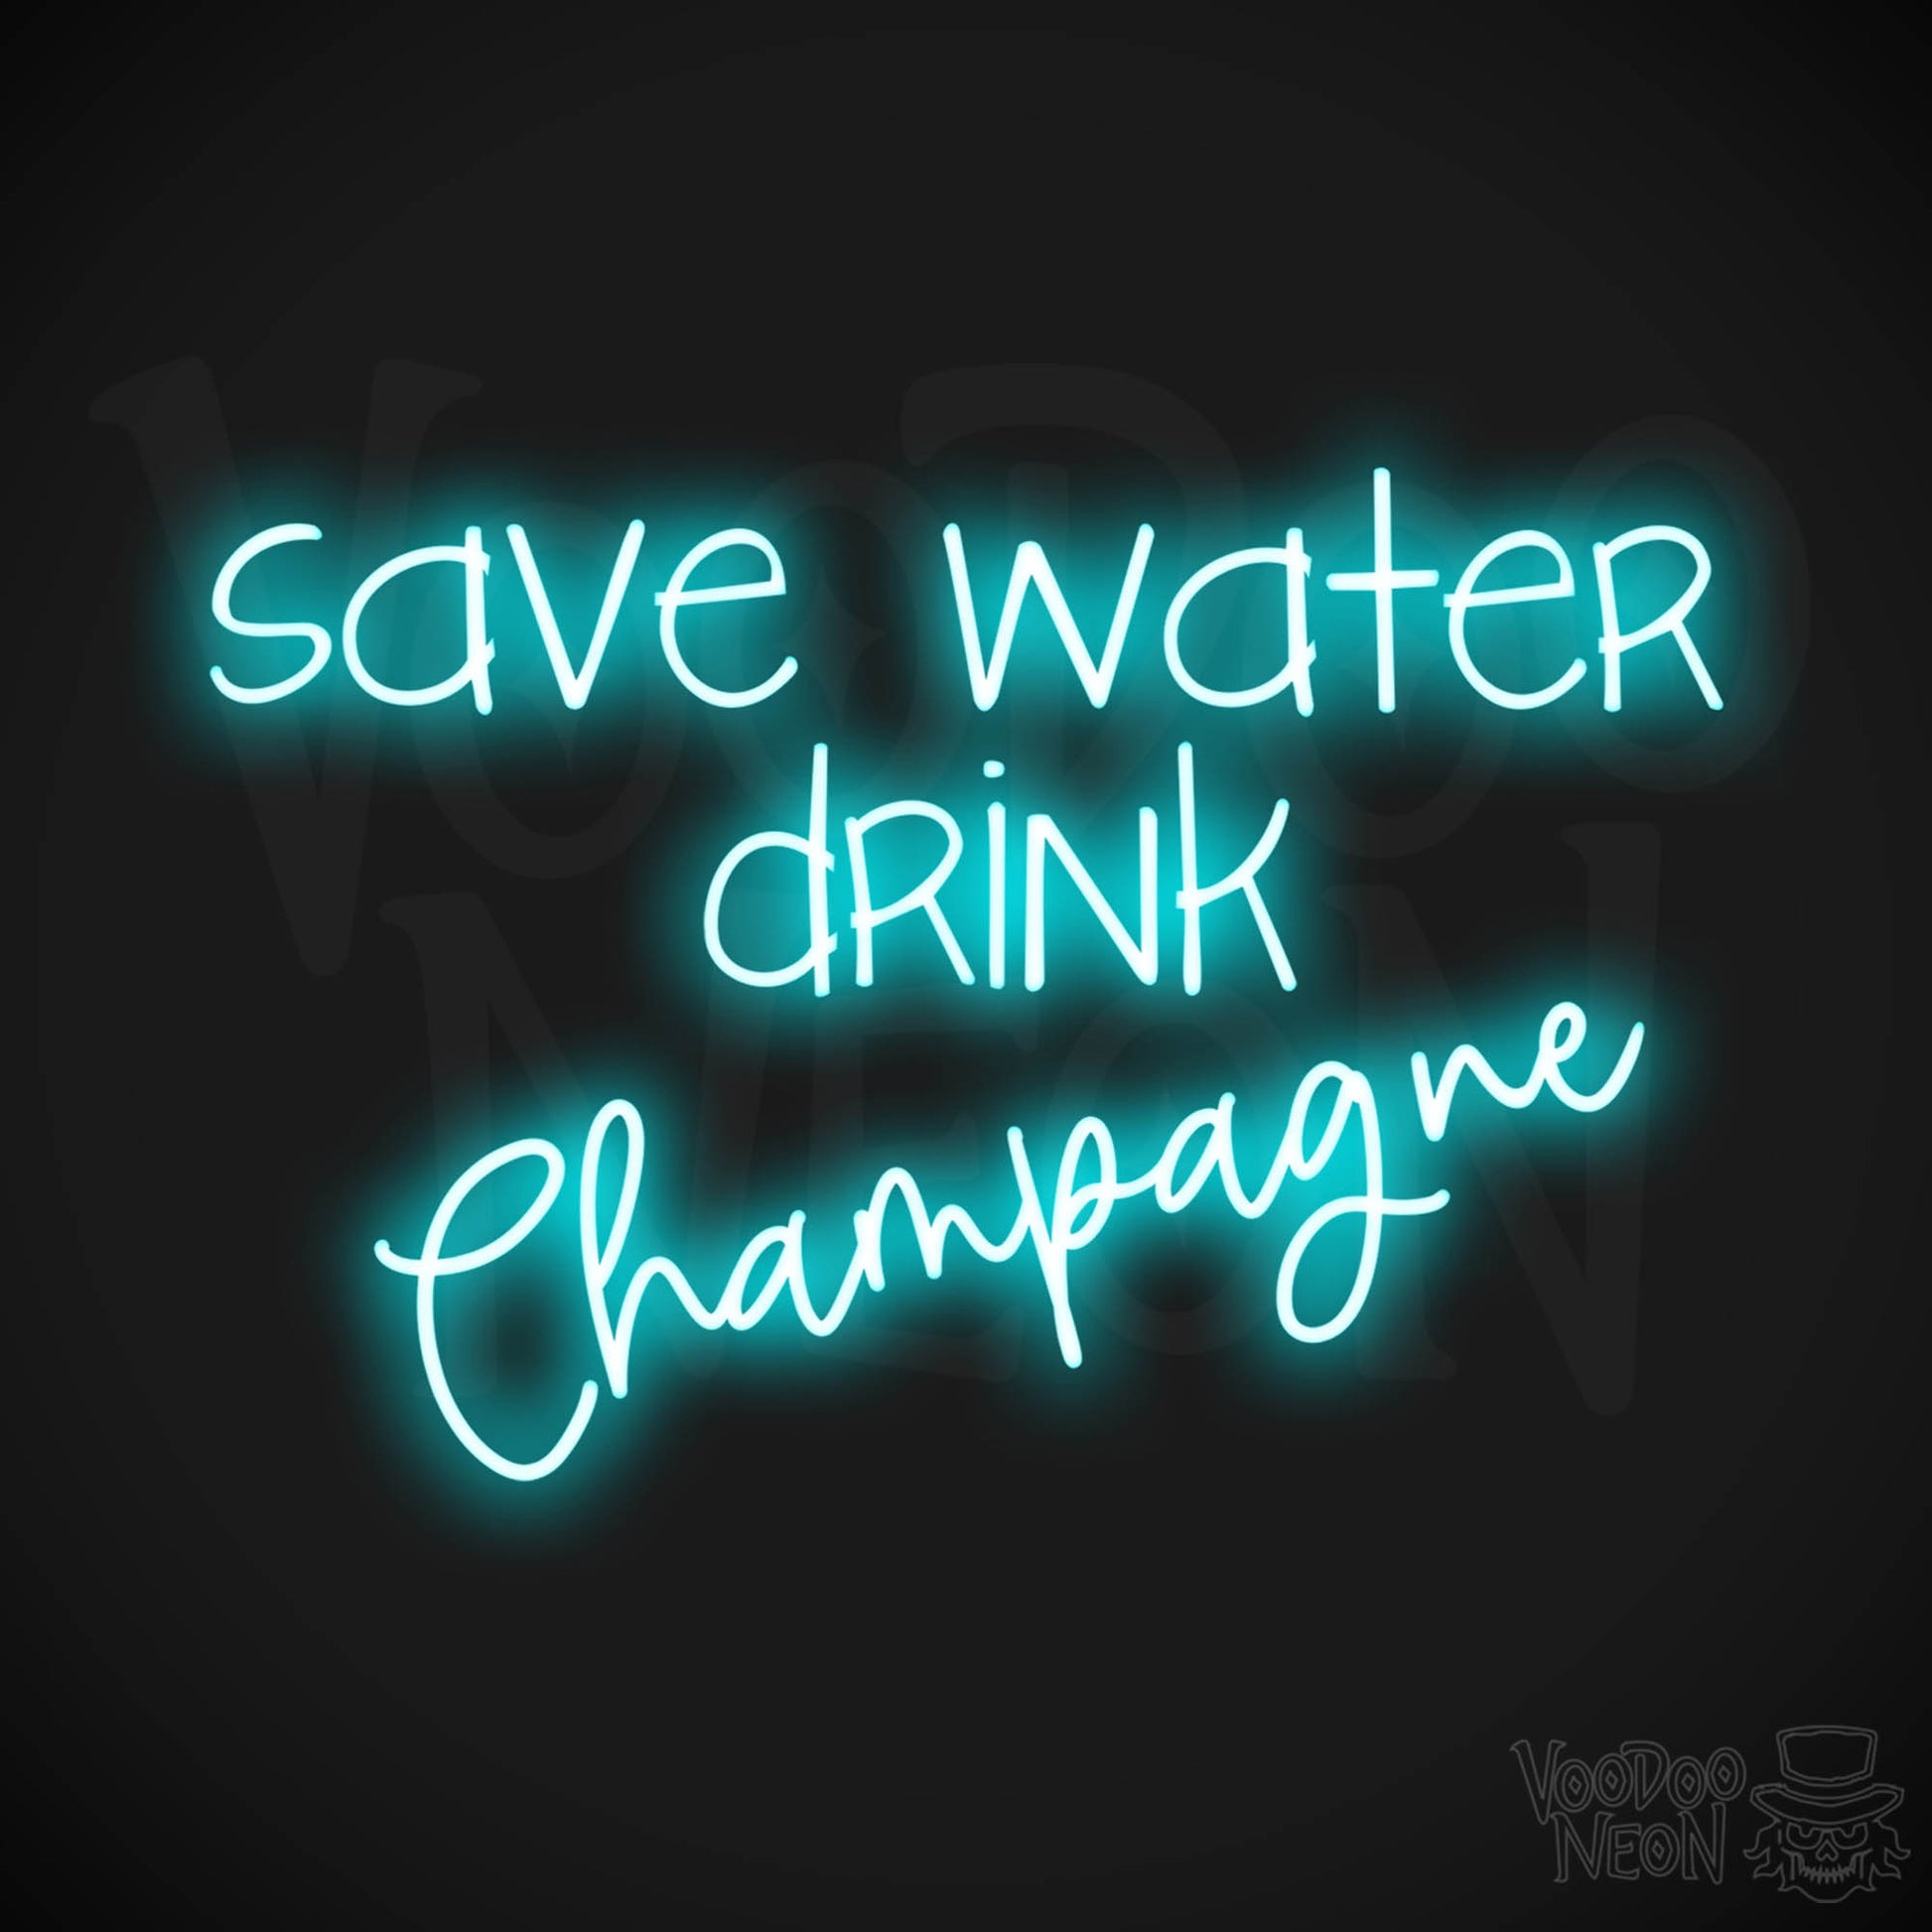 Save Water Drink Champagne LED Neon - Ice Blue